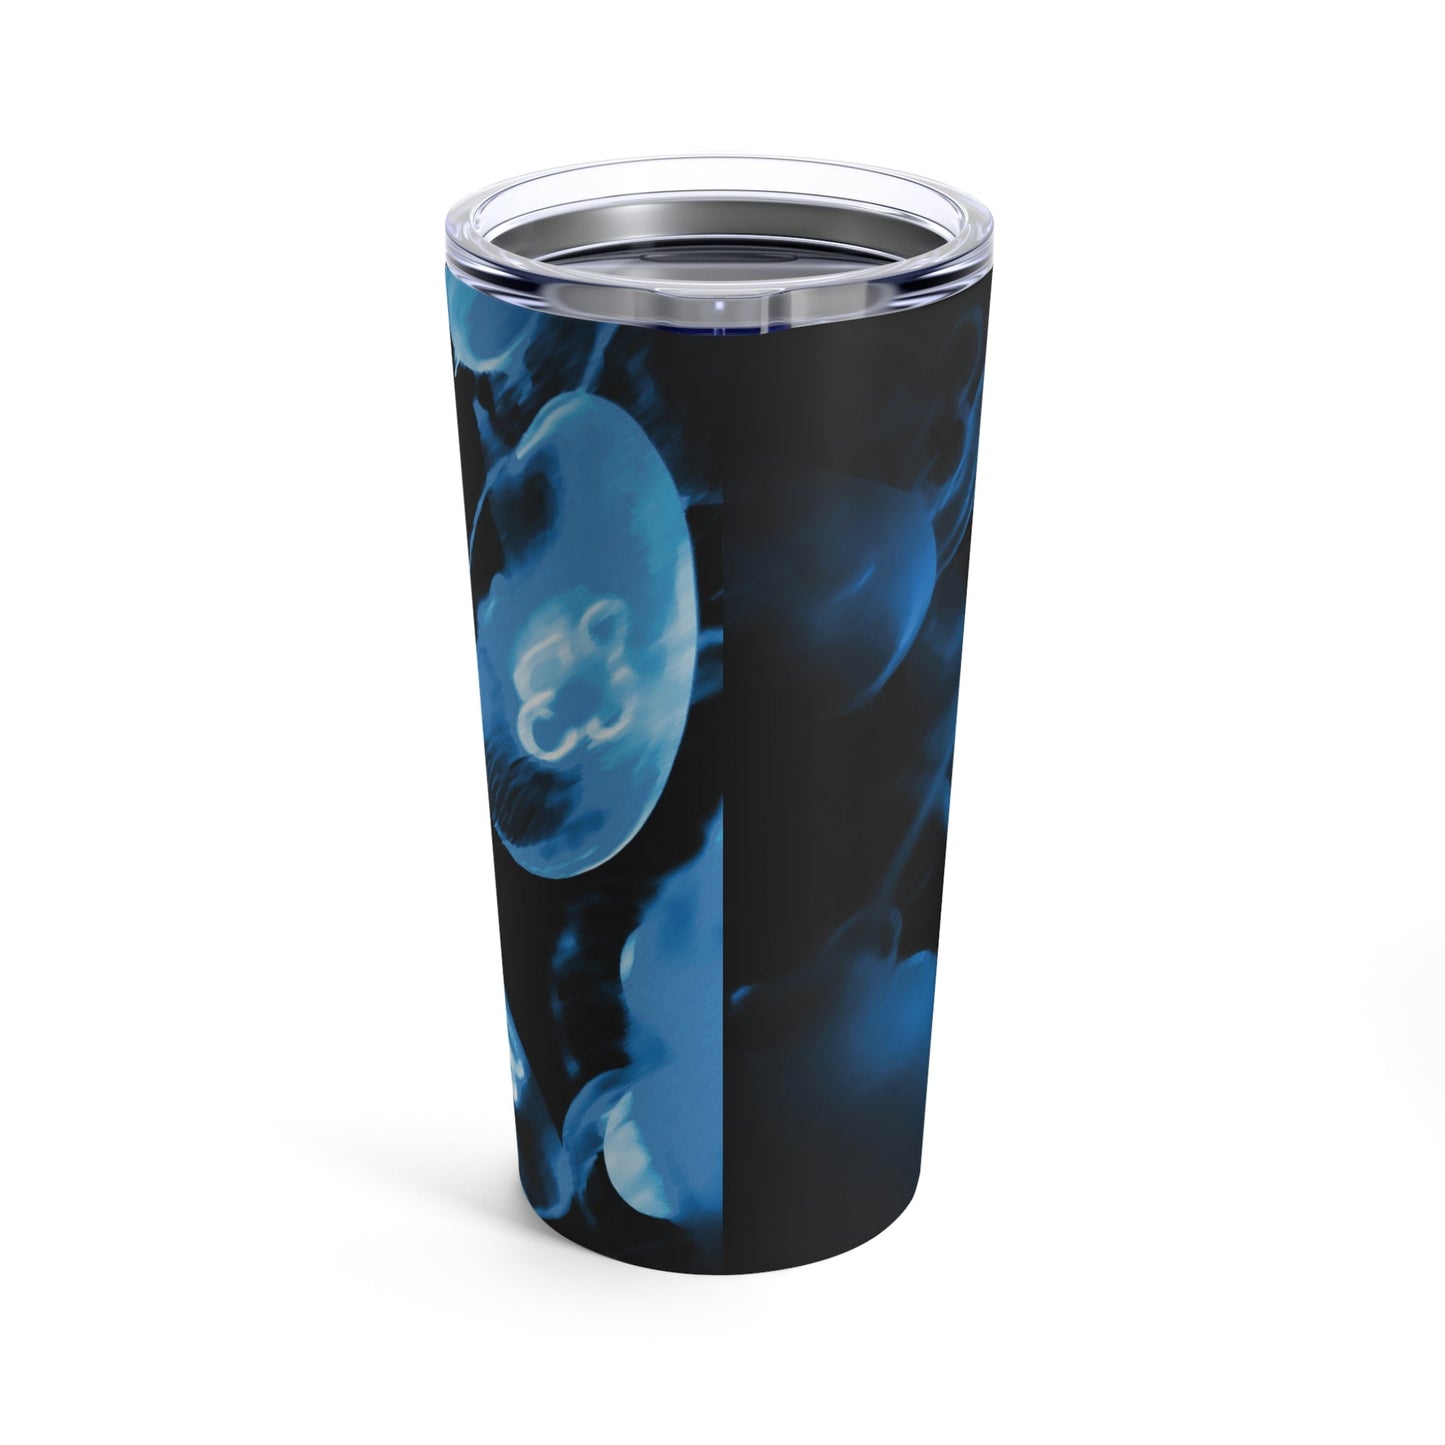 Deep Sea Jellyfish Silhouette Eco Friendly Life Sign Stainless Steel Hot or Cold Vacuum Tumbler 20oz Ichaku [Perfect Gifts Selection]